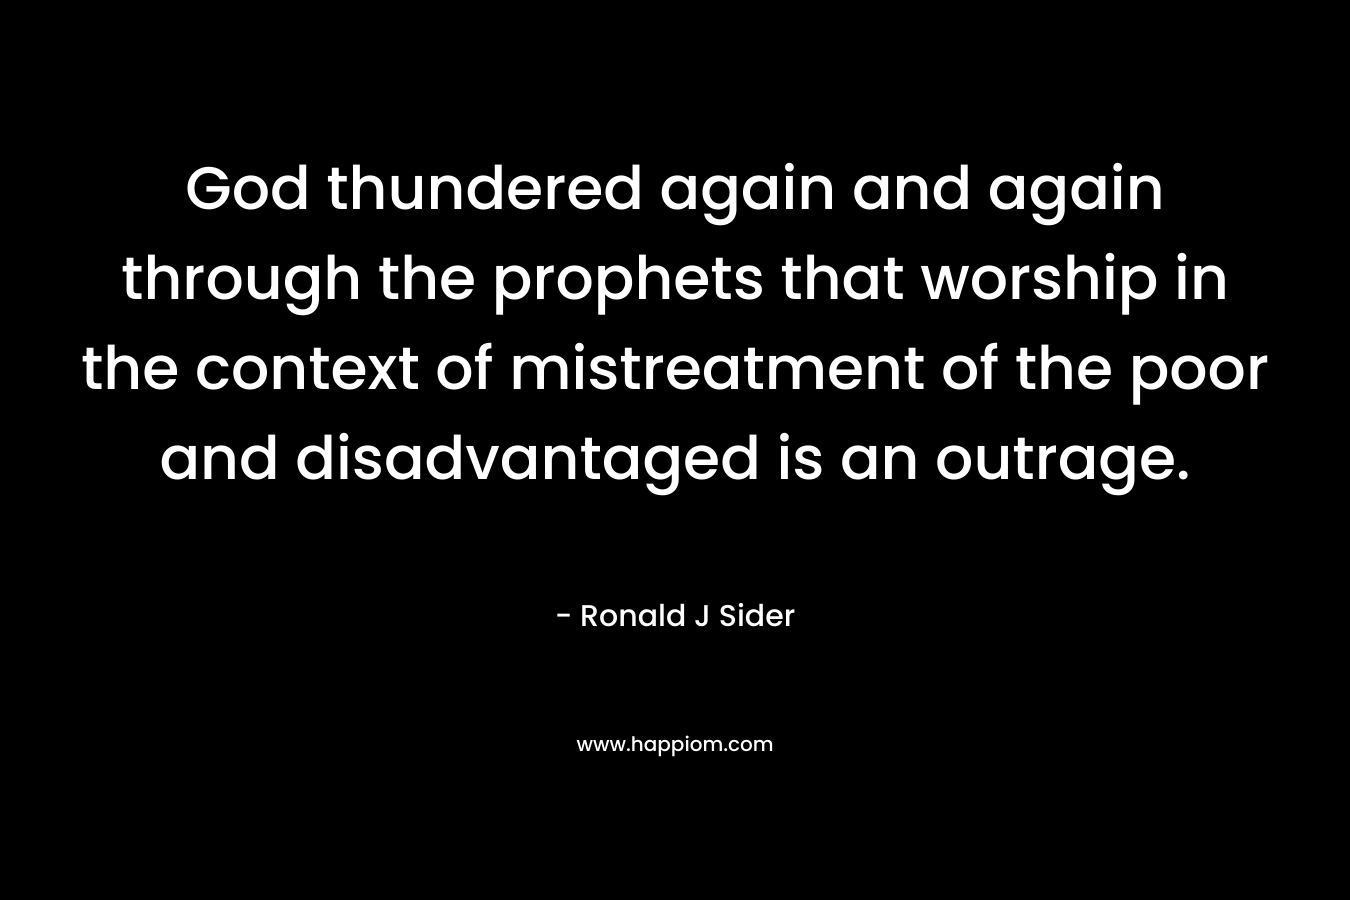 God thundered again and again through the prophets that worship in the context of mistreatment of the poor and disadvantaged is an outrage. – Ronald J Sider